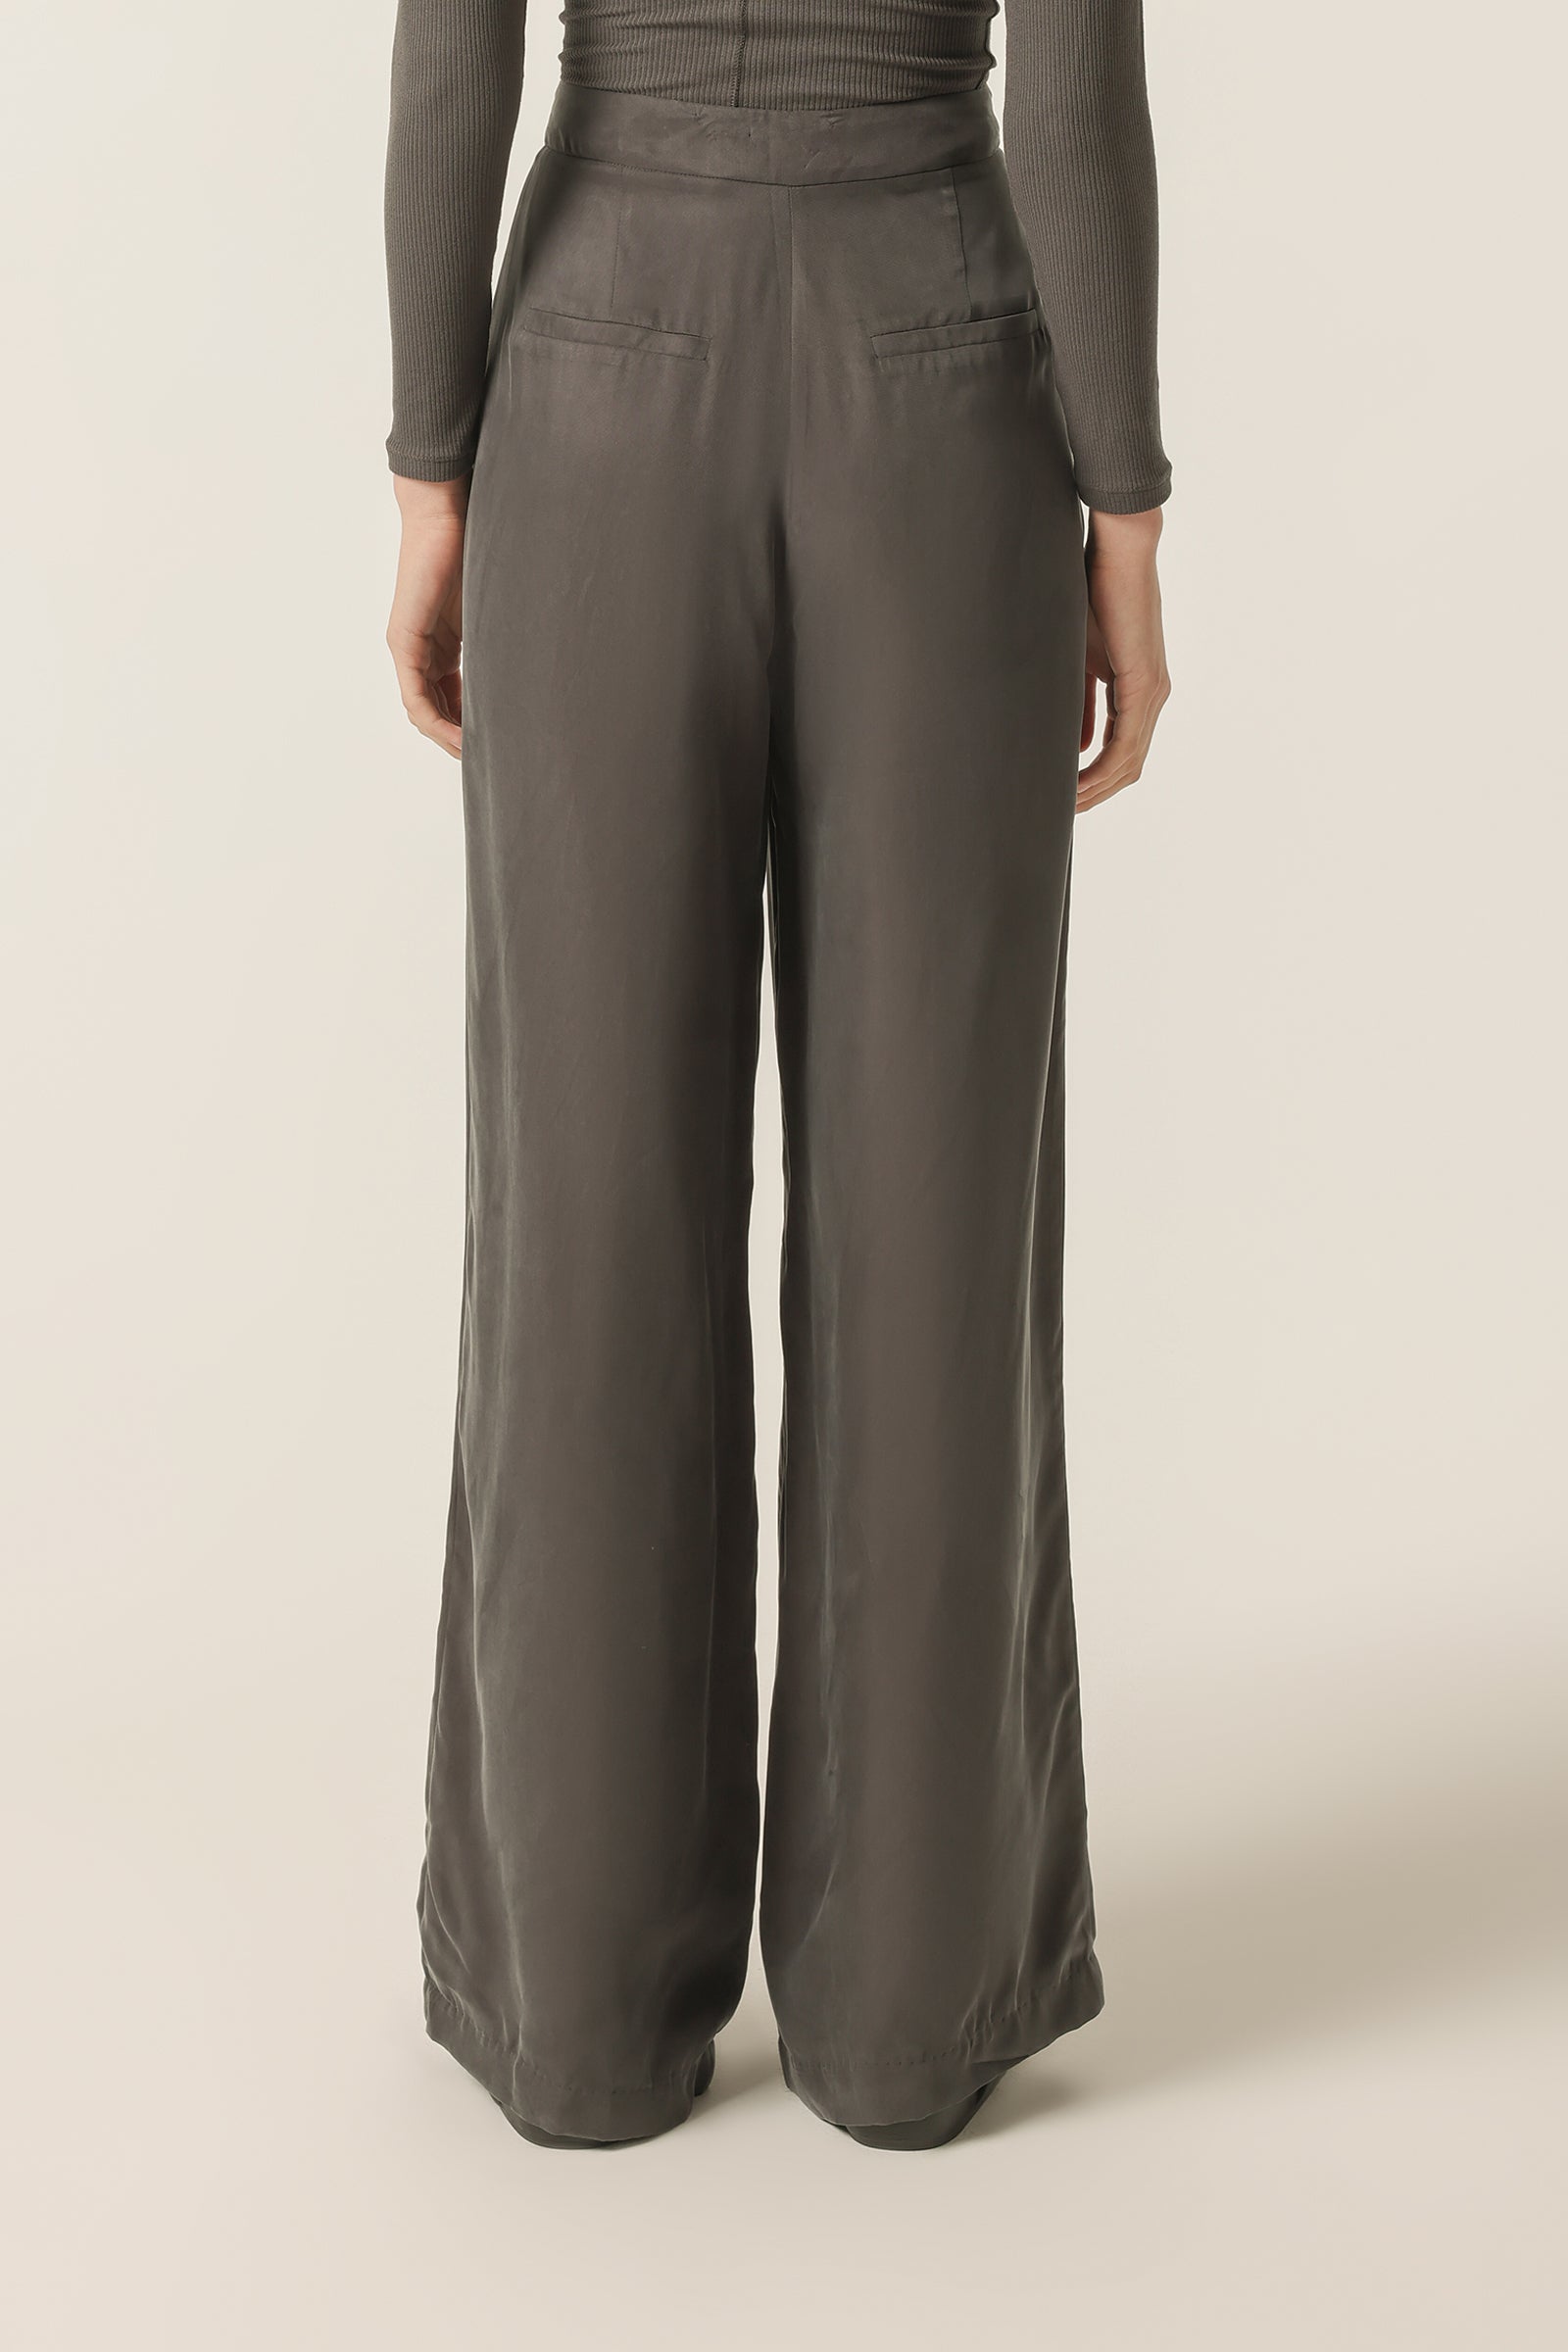 Nude Lucy Gia Cupro Pant in a Dark Grey In a Brown Coal Colour